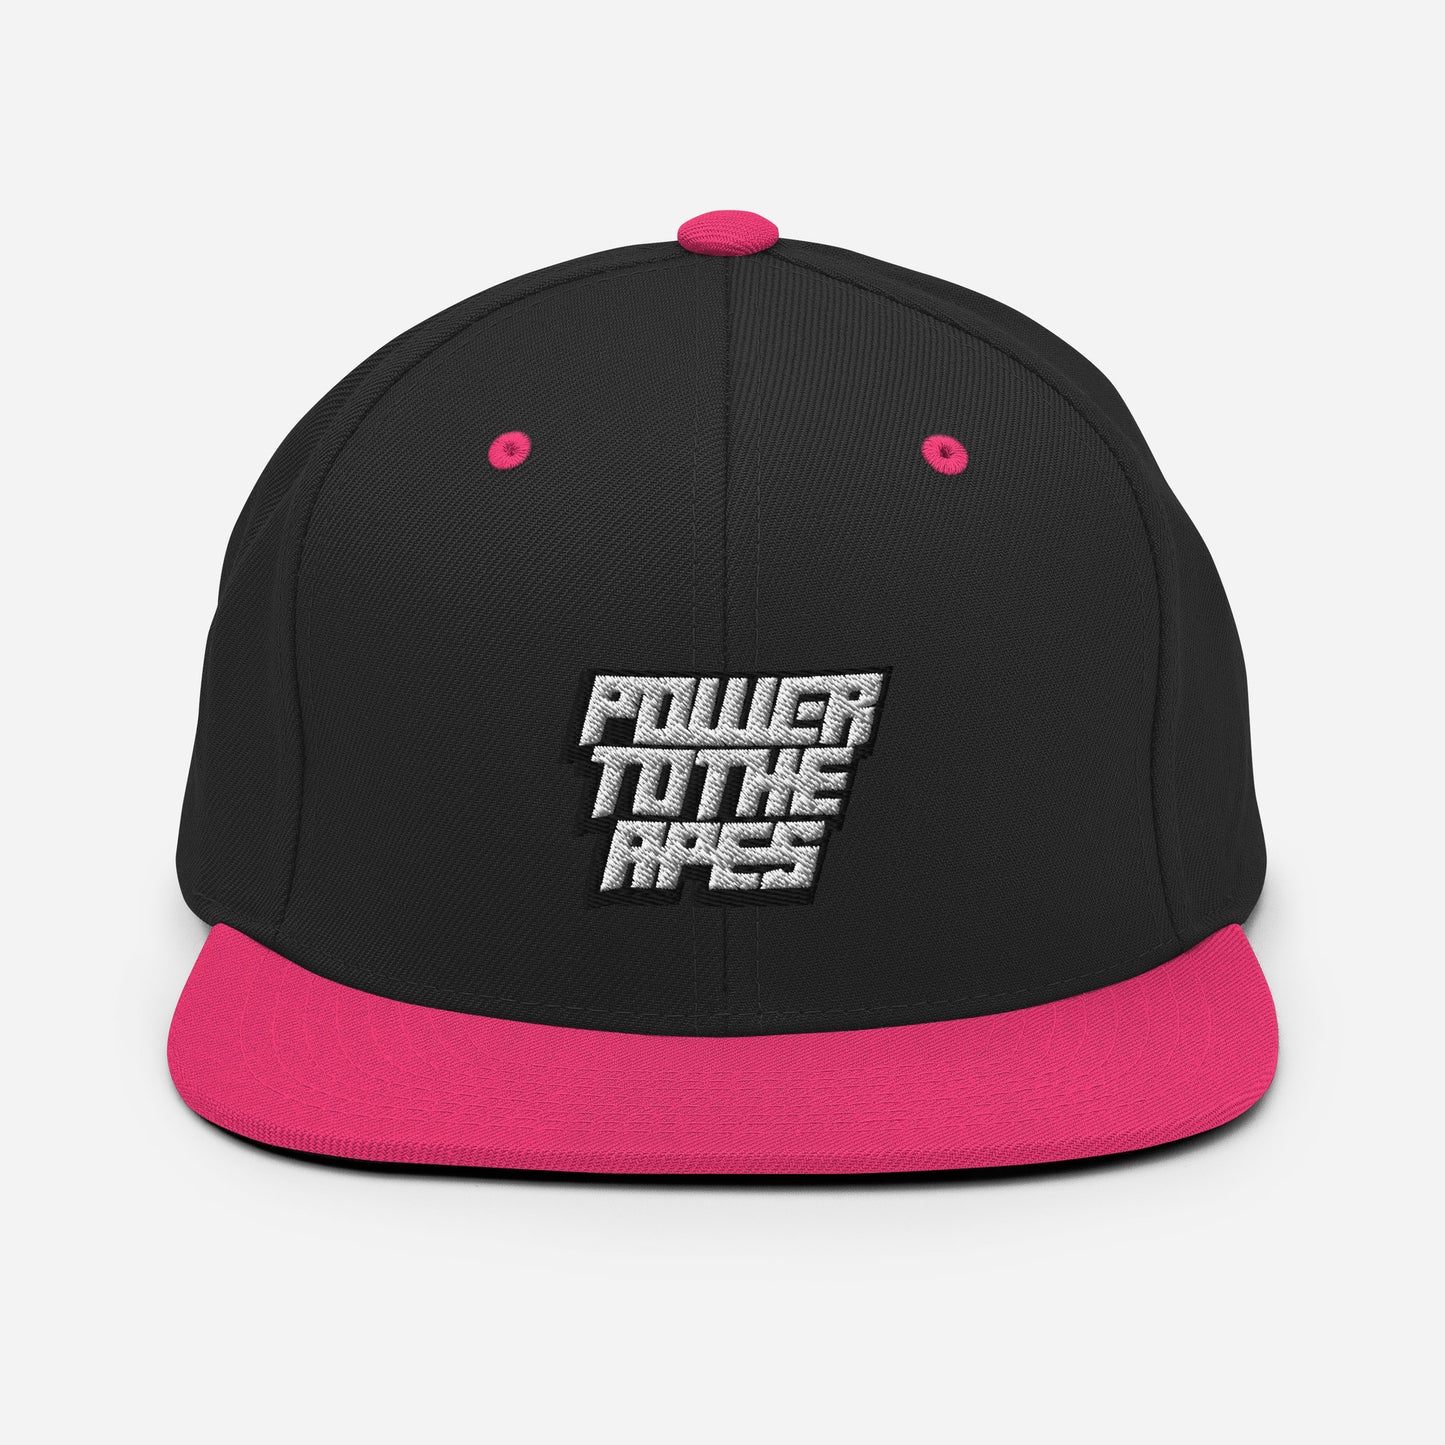 Power to the apes Snapback Hat